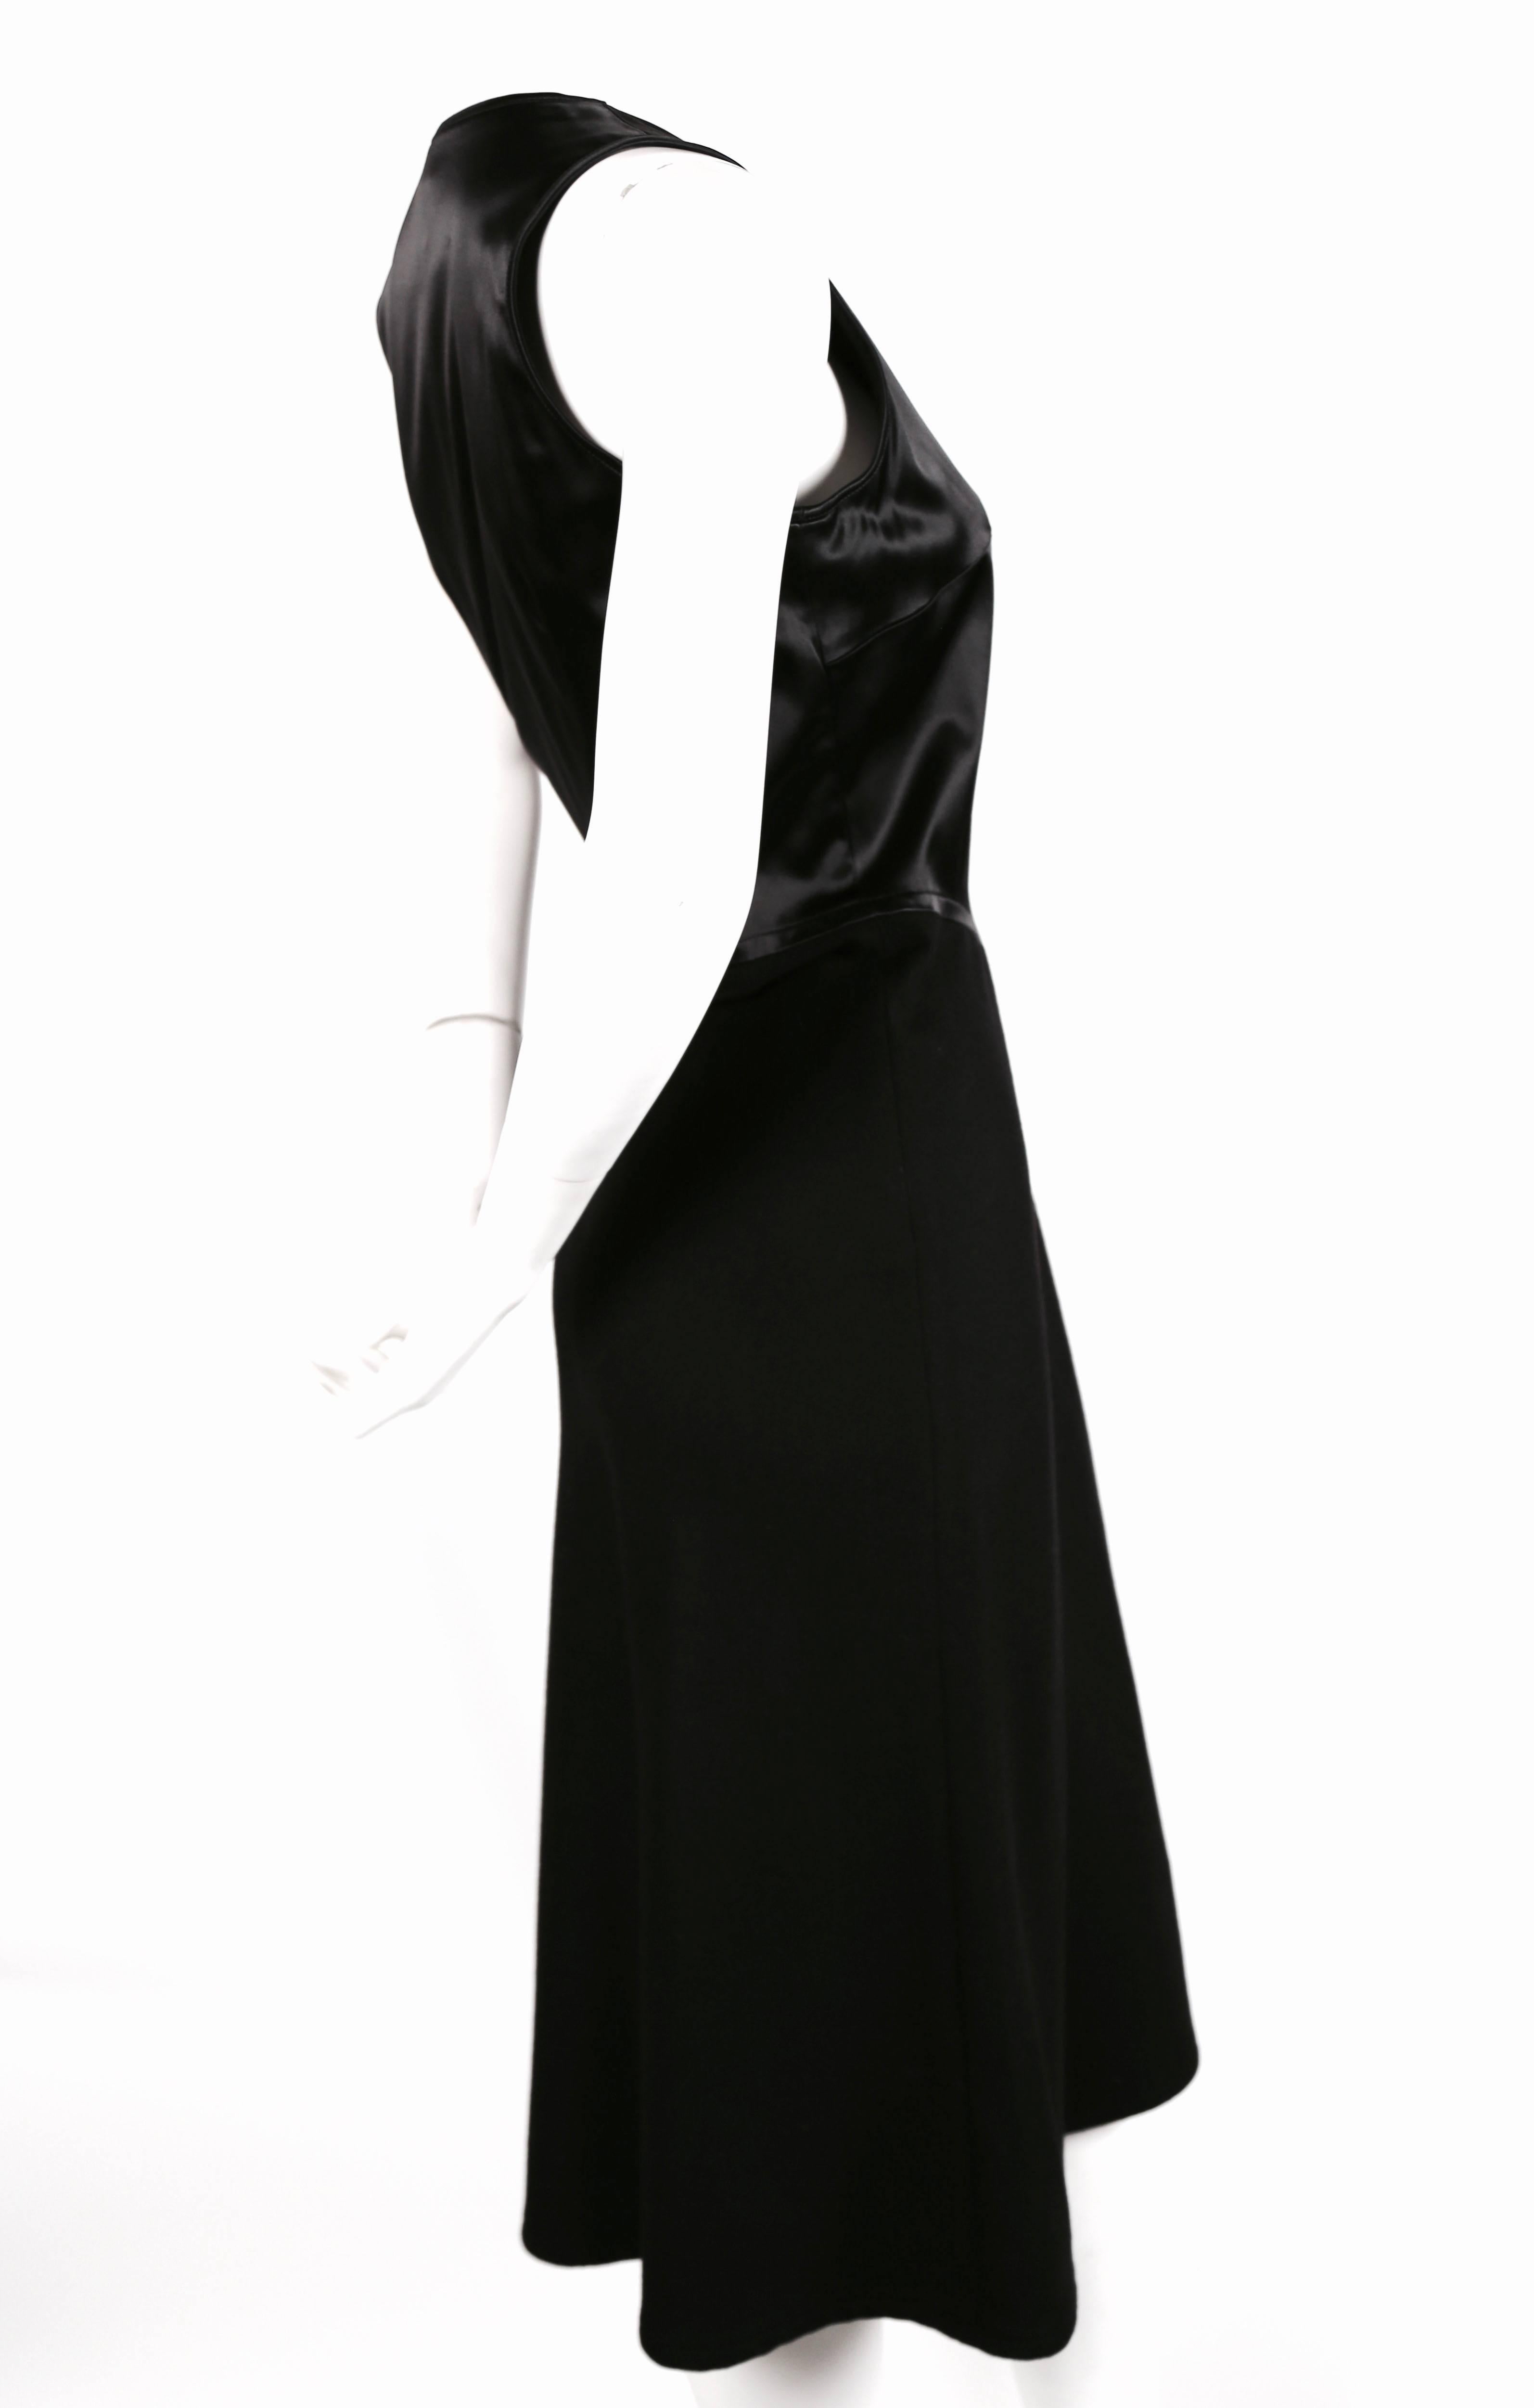 Jet black satin and angora dress with asymmetrical slit designed by Herve Leger dating to the 1990's. Best fits a US 6-8. Approximate measurements: 
36